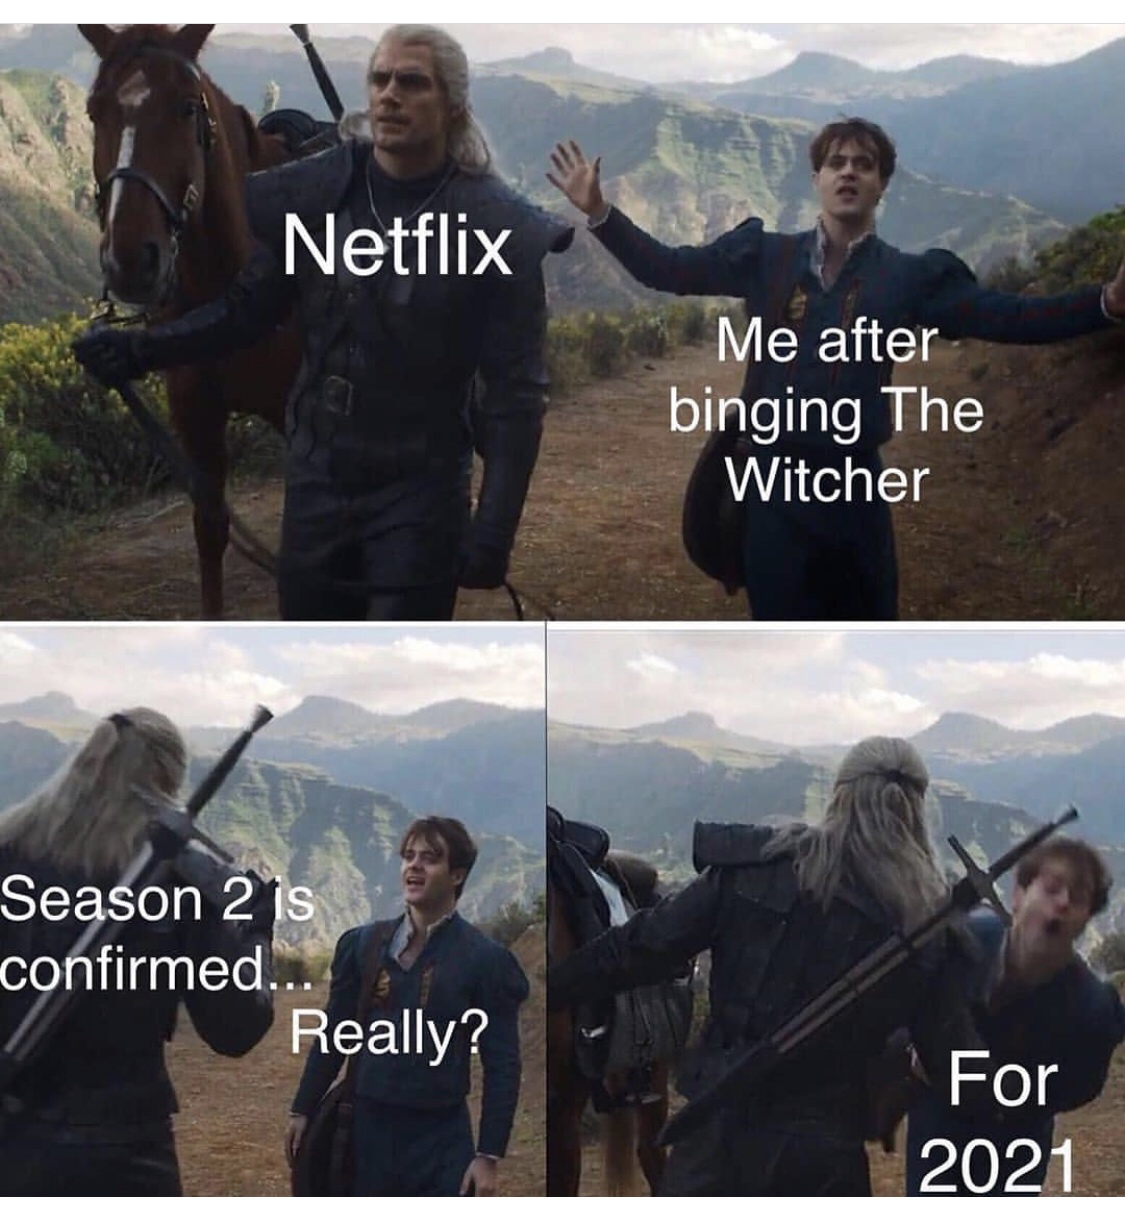 The Witcher - Netflix Me after binging The Witcher Season 2 is confirmed.. Really? For 12021